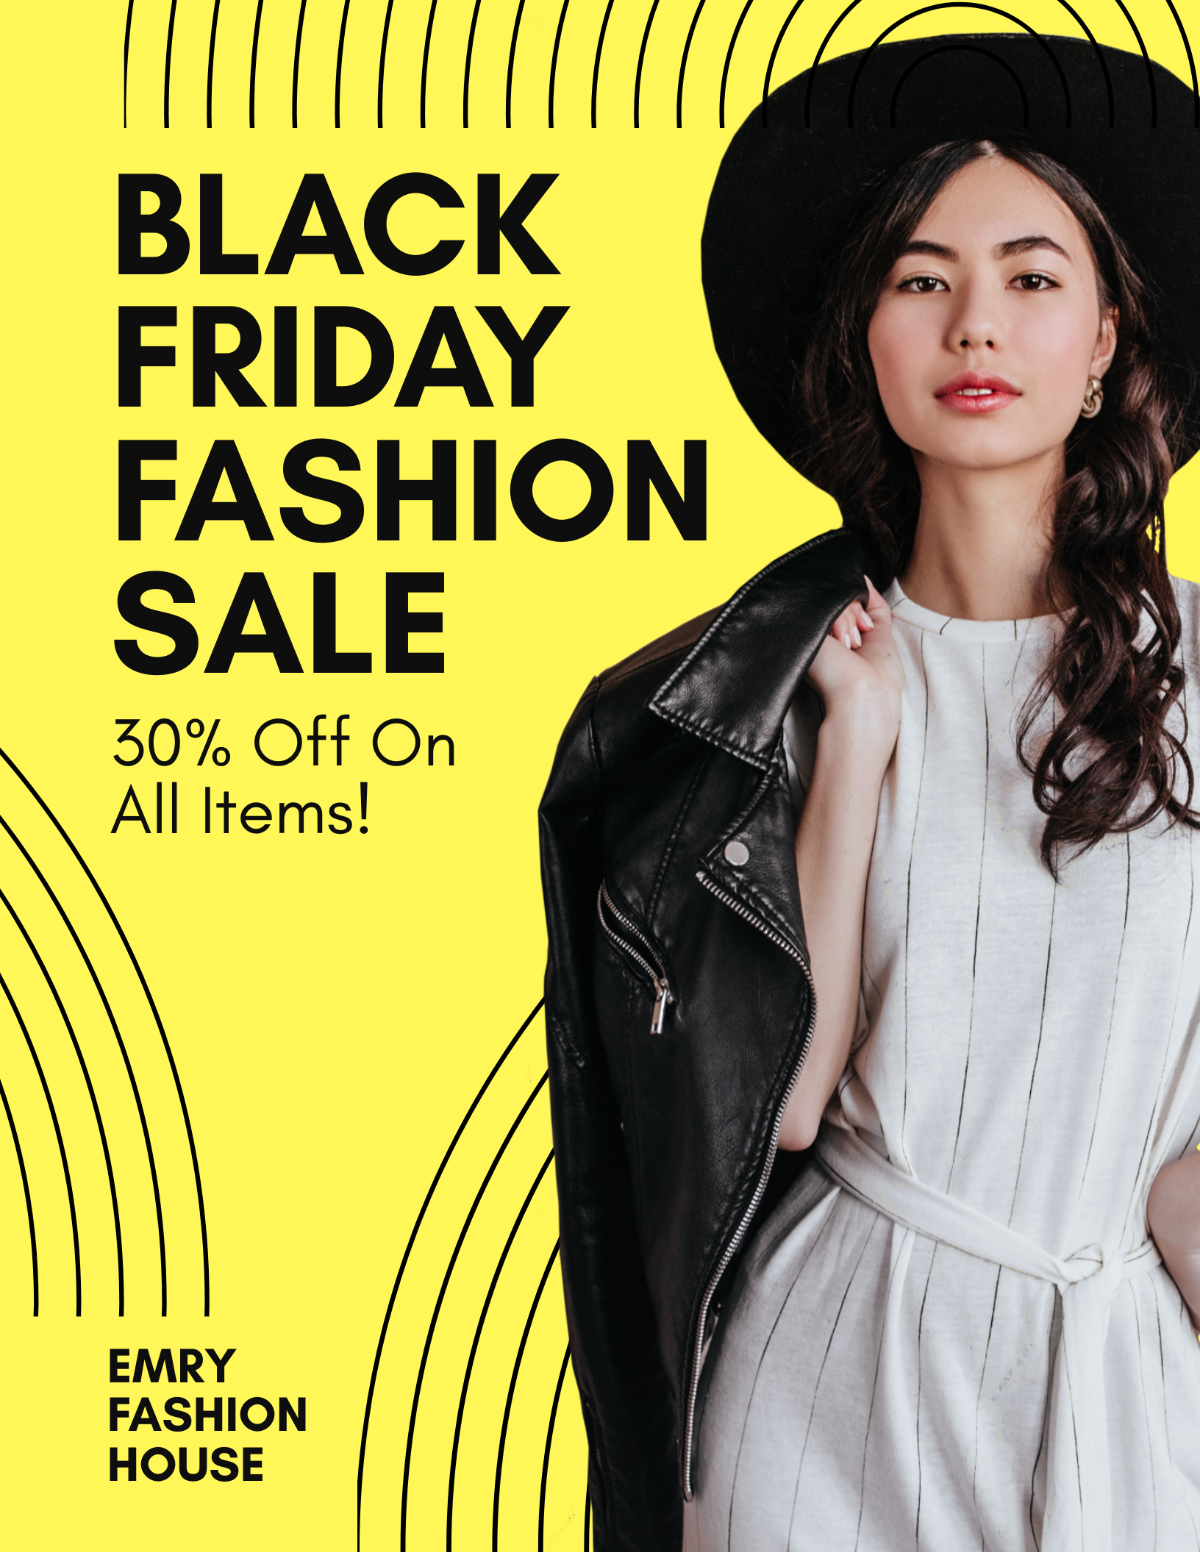 Free Black Friday Fashion Sale Flyer Template